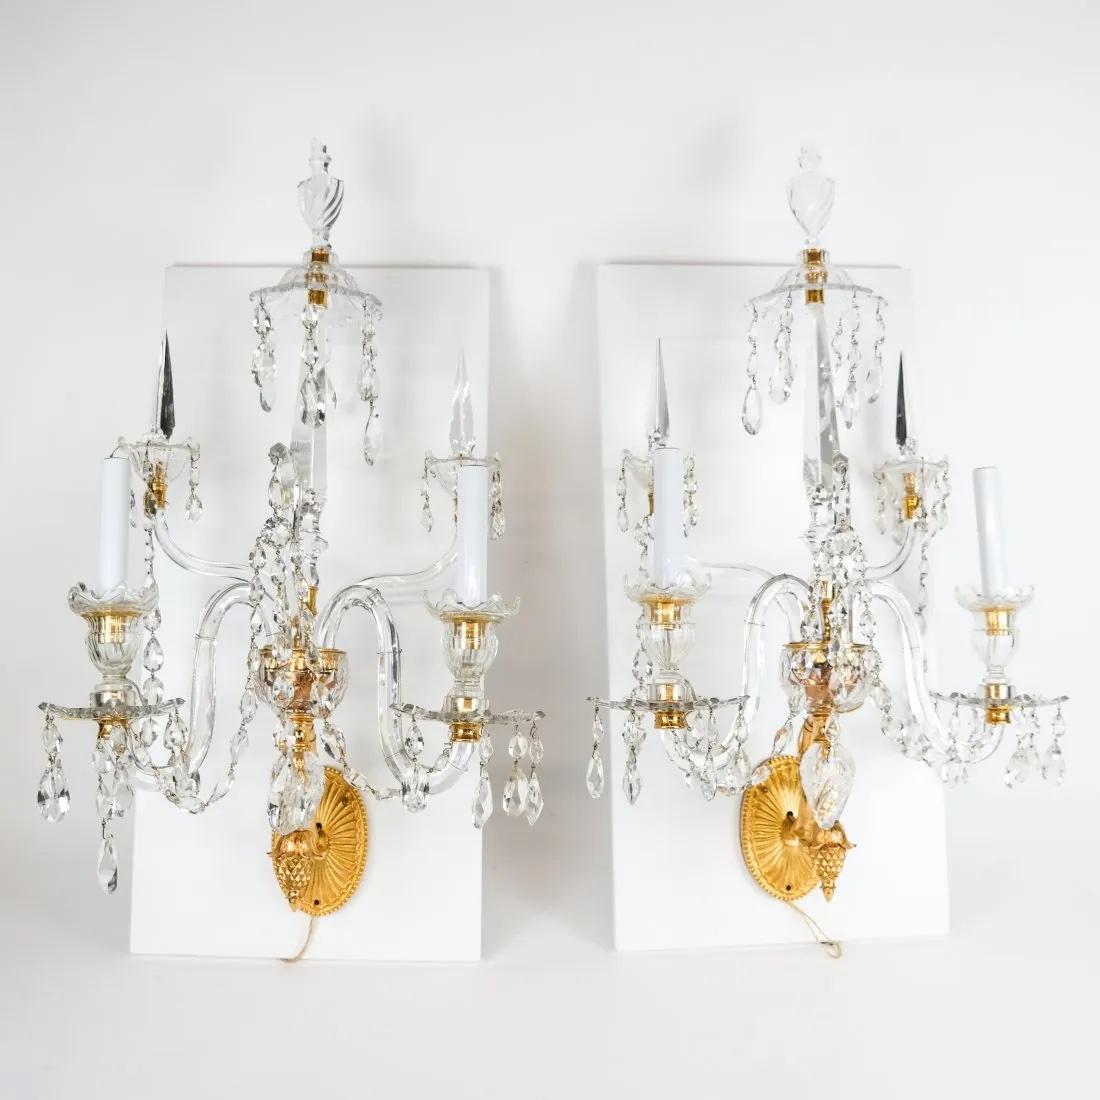 Pair of exquisite George III style wall sconces. Cut English crystal. Ormolu mounts.